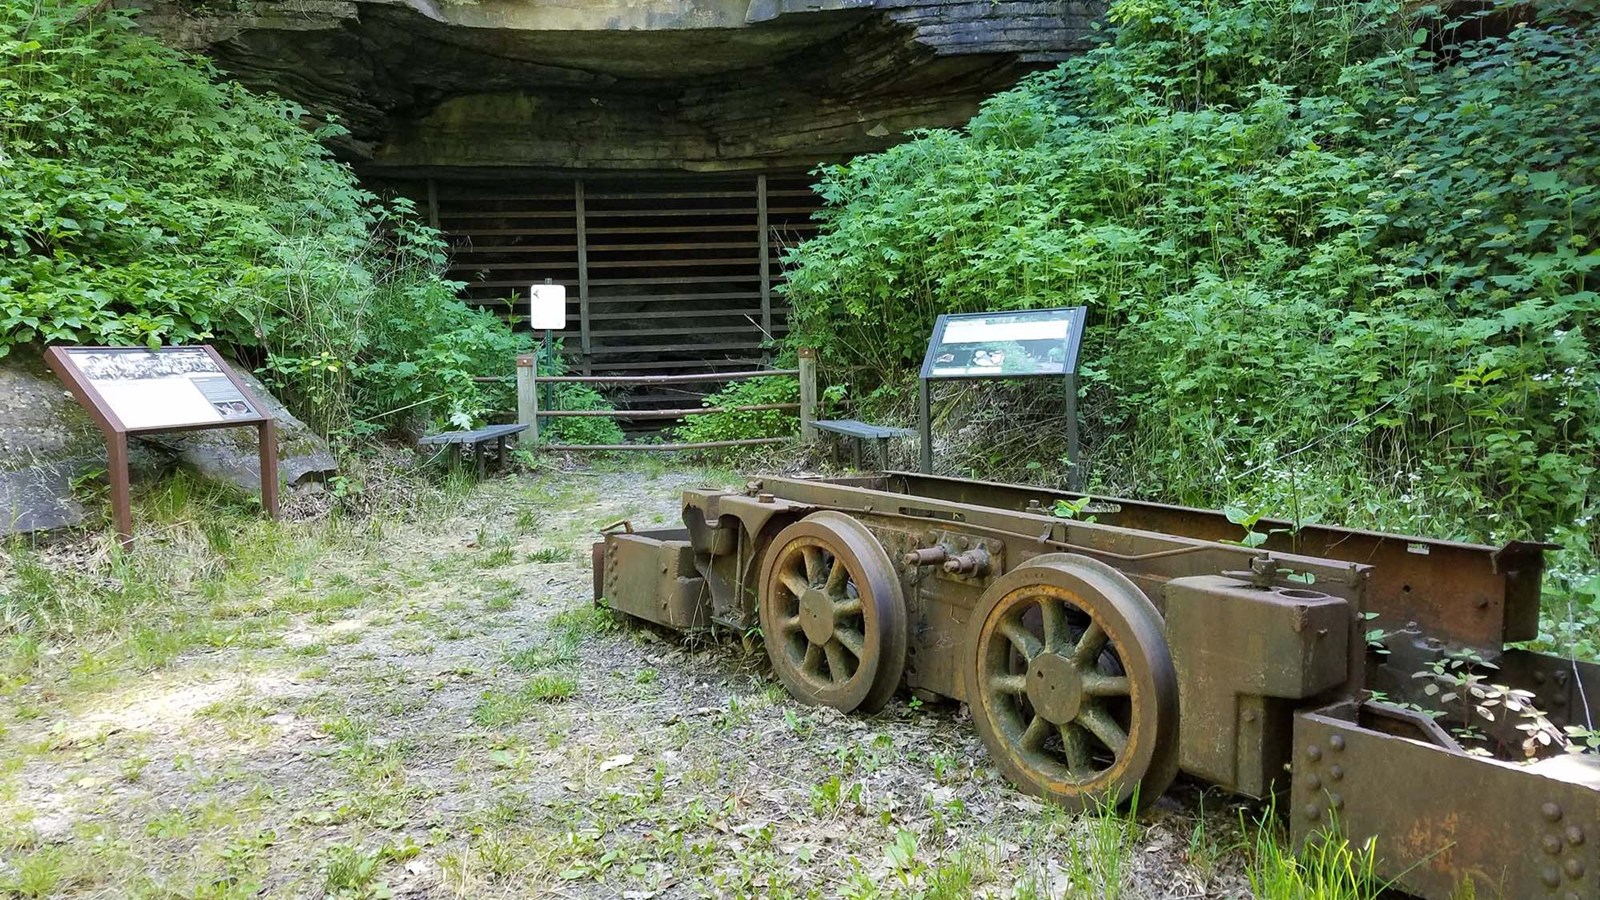 A mine car ruin sits in front of the mine entrance